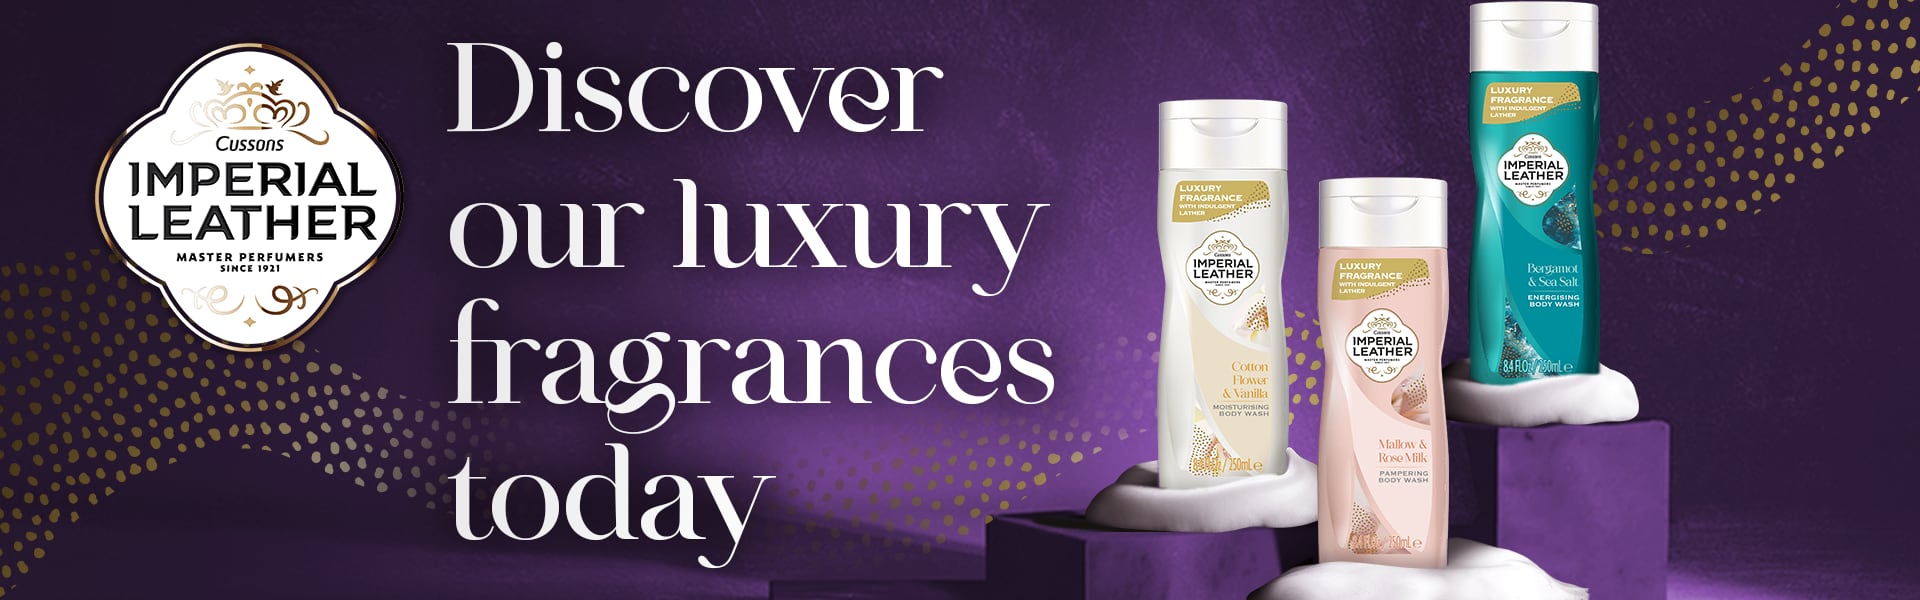 Discover our luxury fragrances today